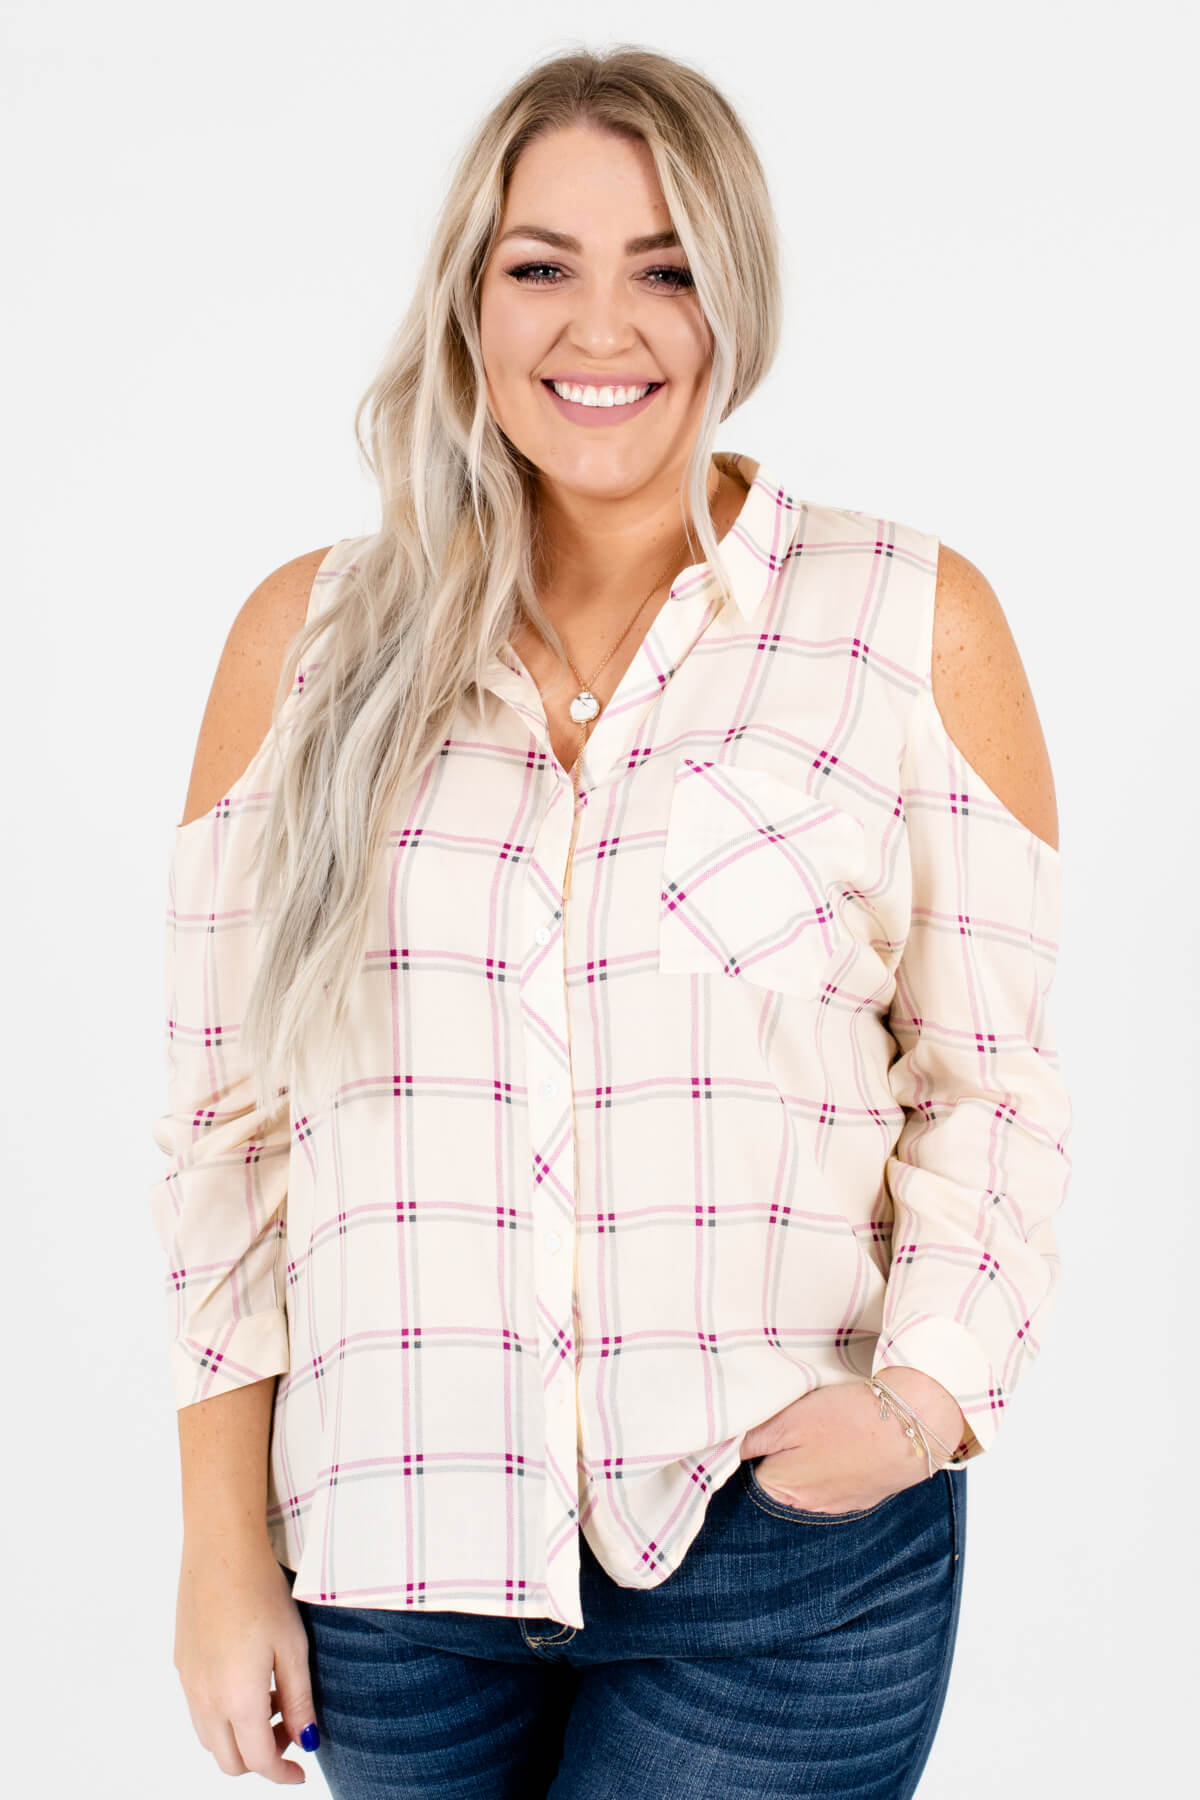 Cream Purple and Slate Plaid Patterned Plus Size Boutique Tops for Women